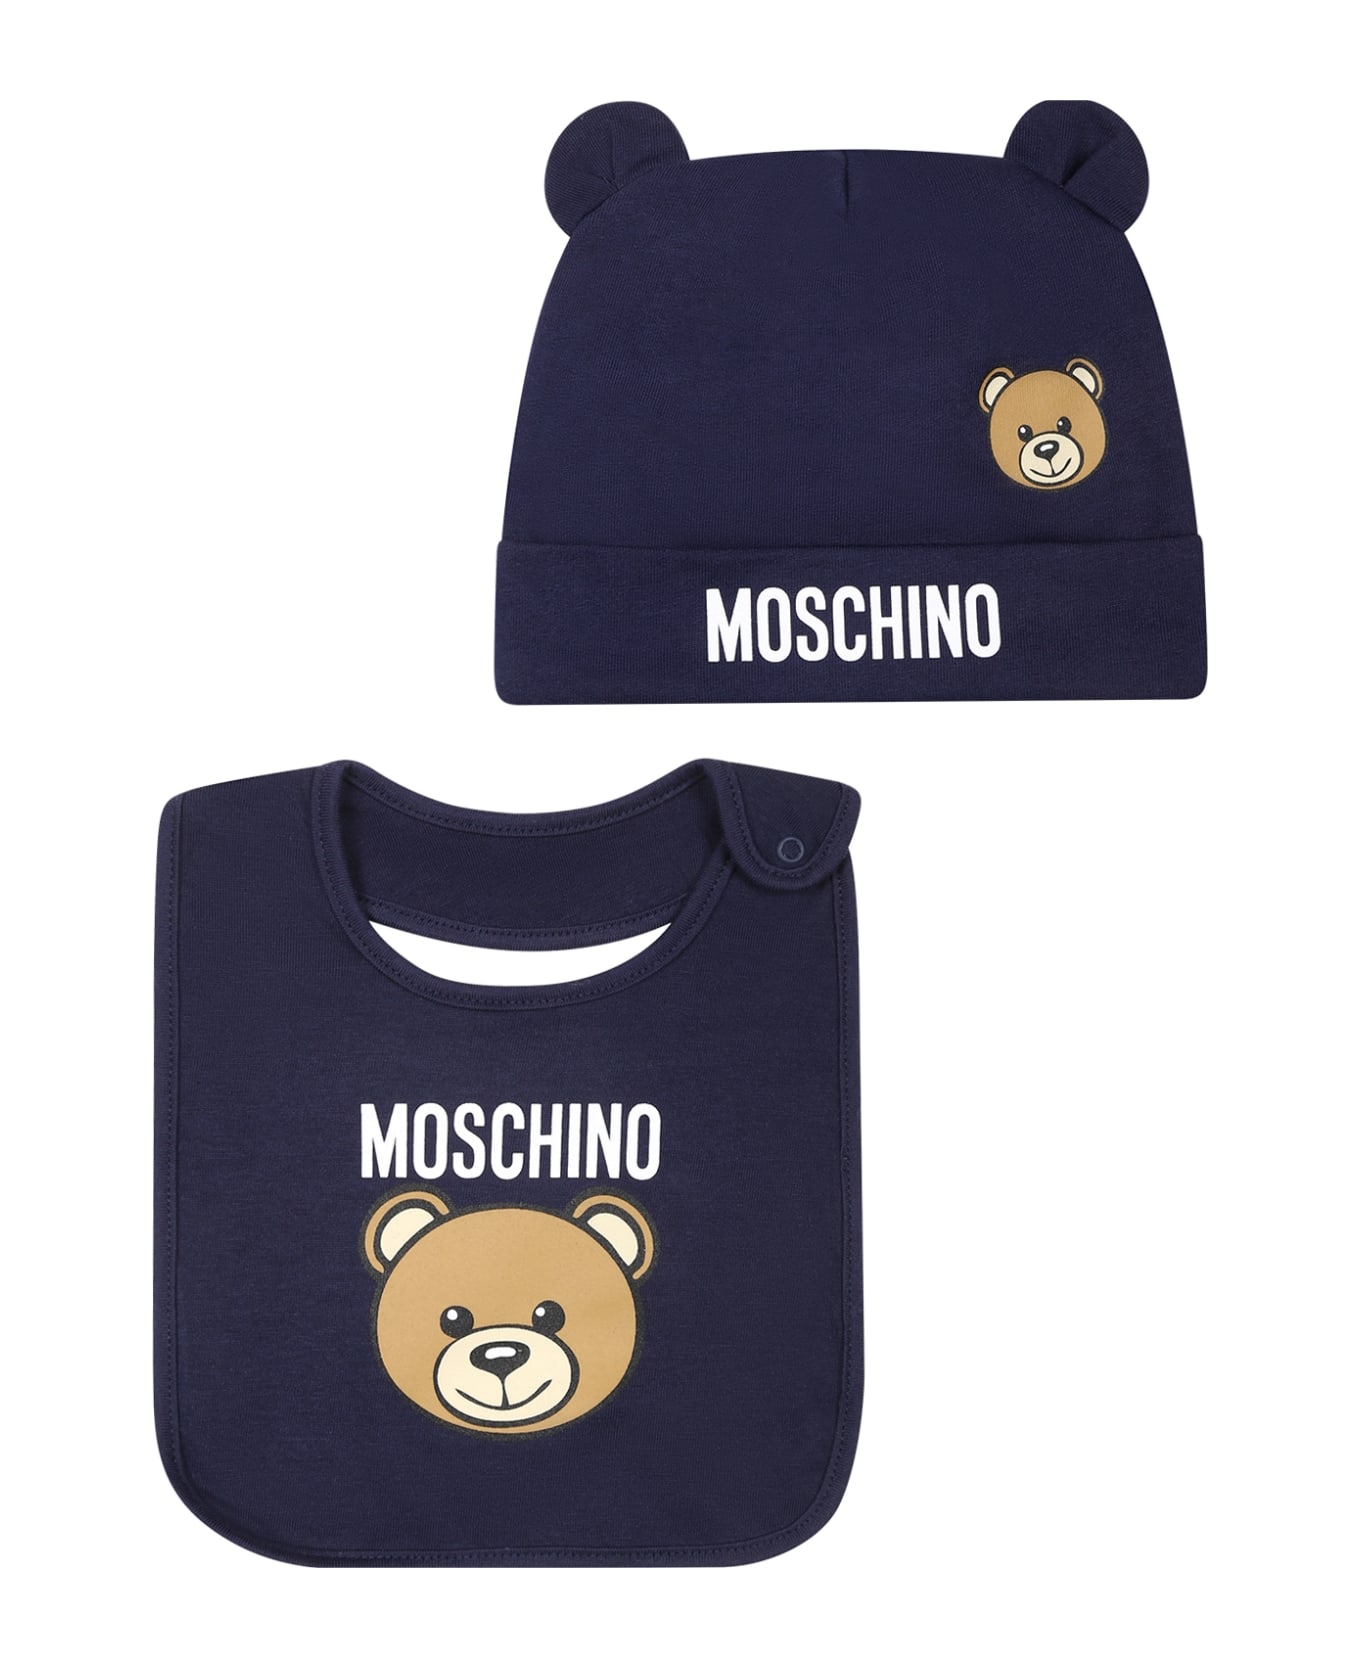 Moschino Blue Set For Baby Boy With Teddy Bear And Logo - Blue アクセサリー＆ギフト